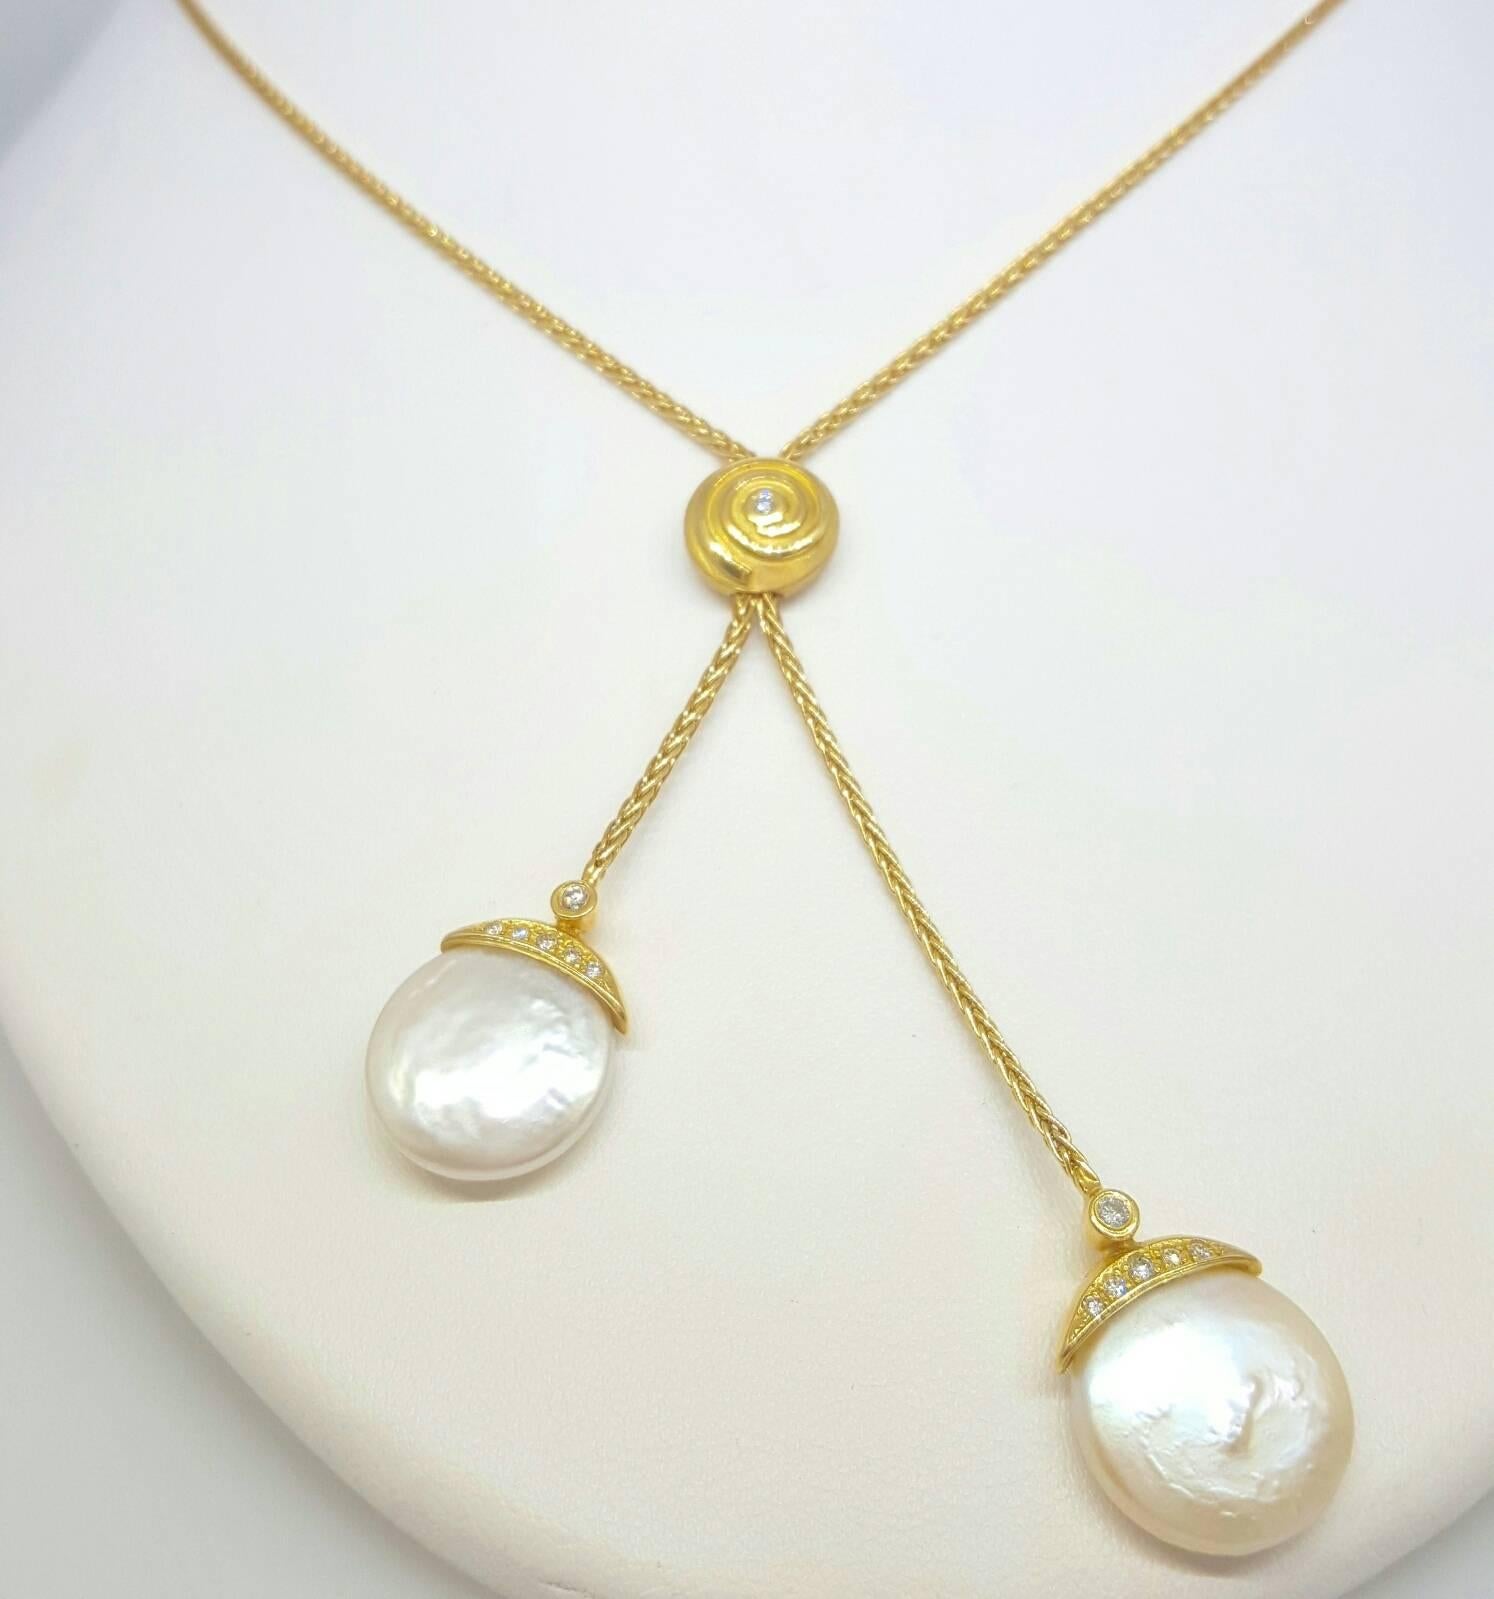 This 18 karat yellow gold Yvel Necklace is set with 13 round brilliant cut diamonds that weigh approximately 0.20 carats total weight and two coin pearls that measure 4.4mm in diameter. The necklace is 18 inches long (20 inches overall including the